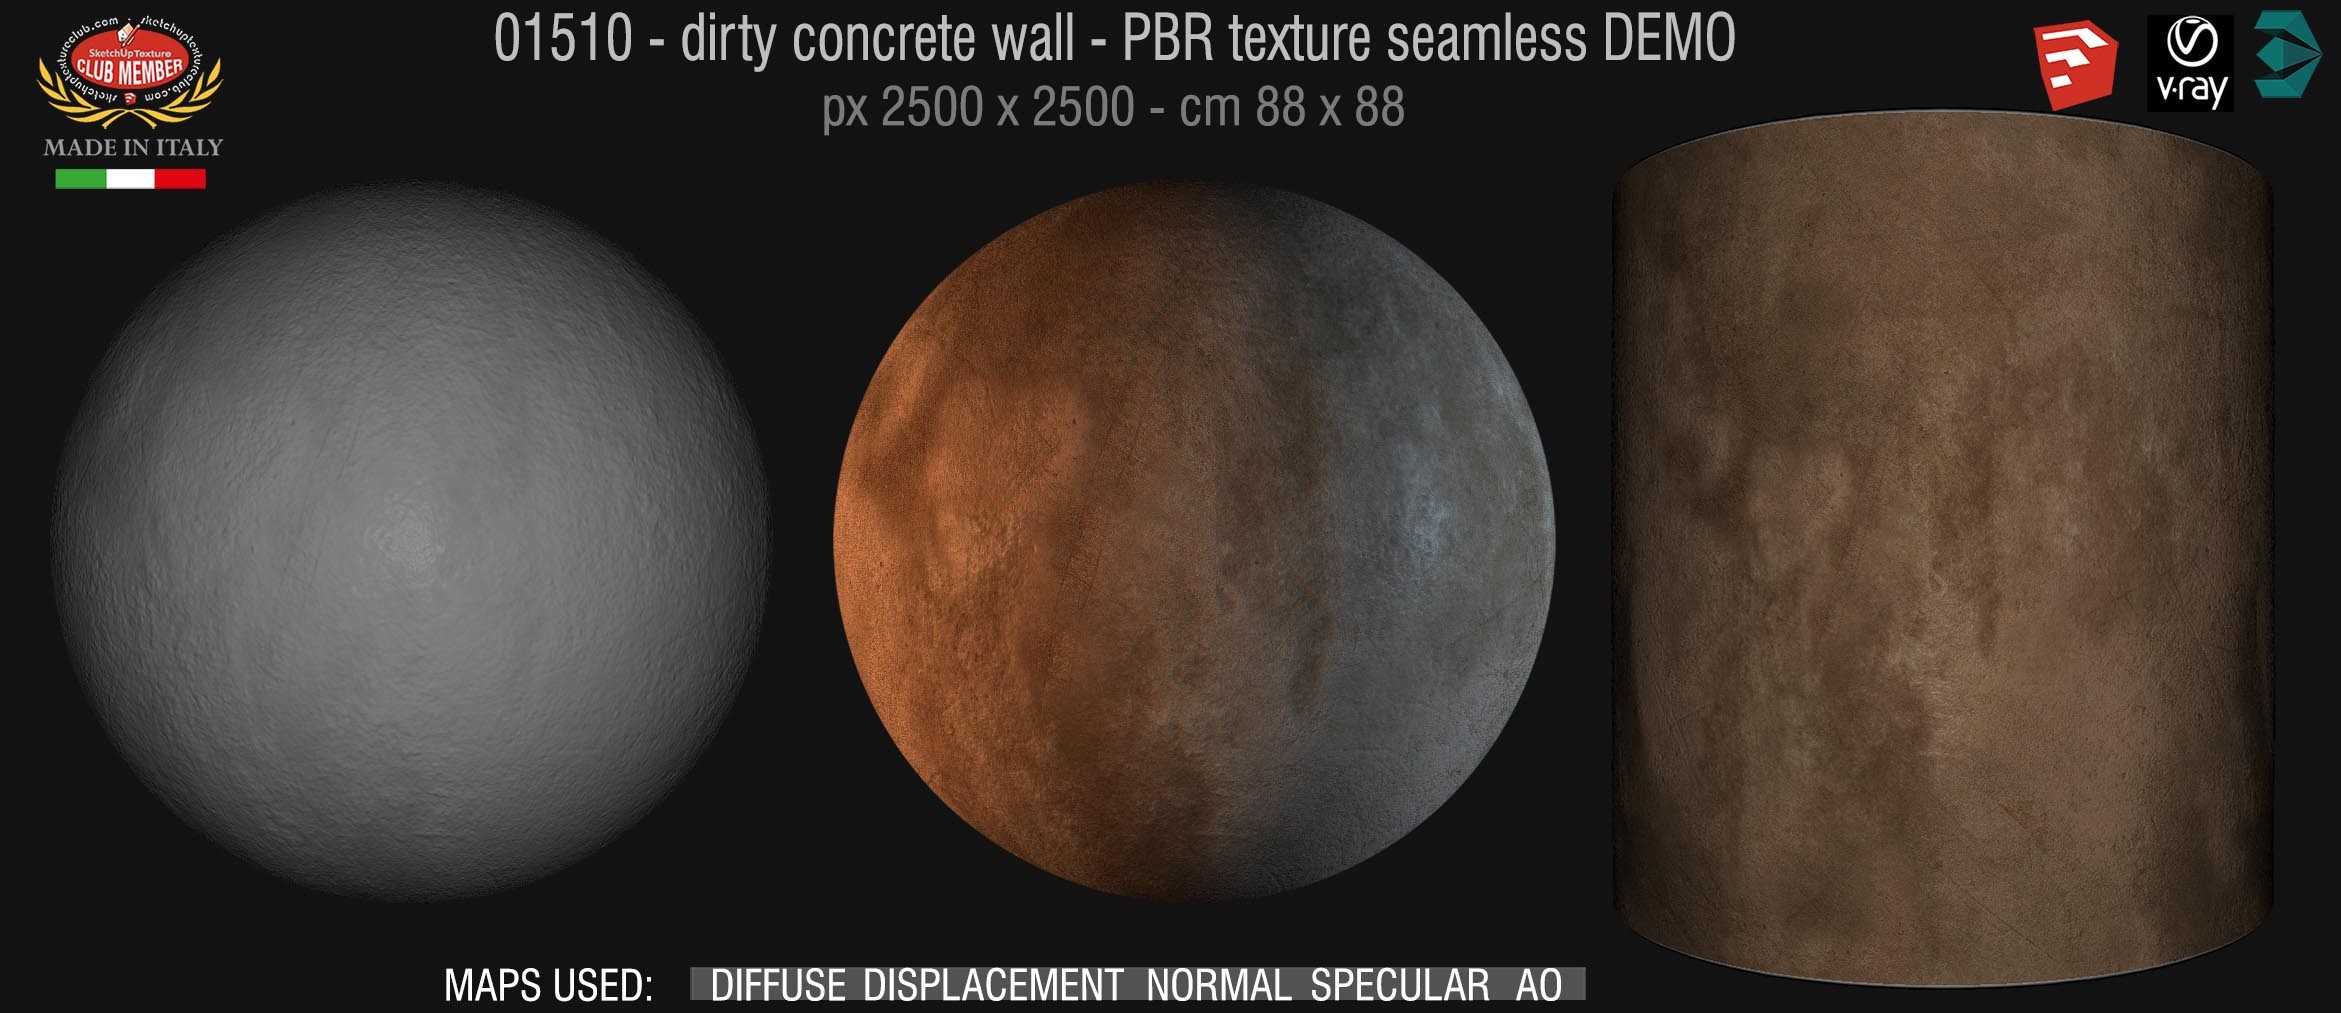 01510 Concrete bare dirty wall PBR texture seamless DEMO